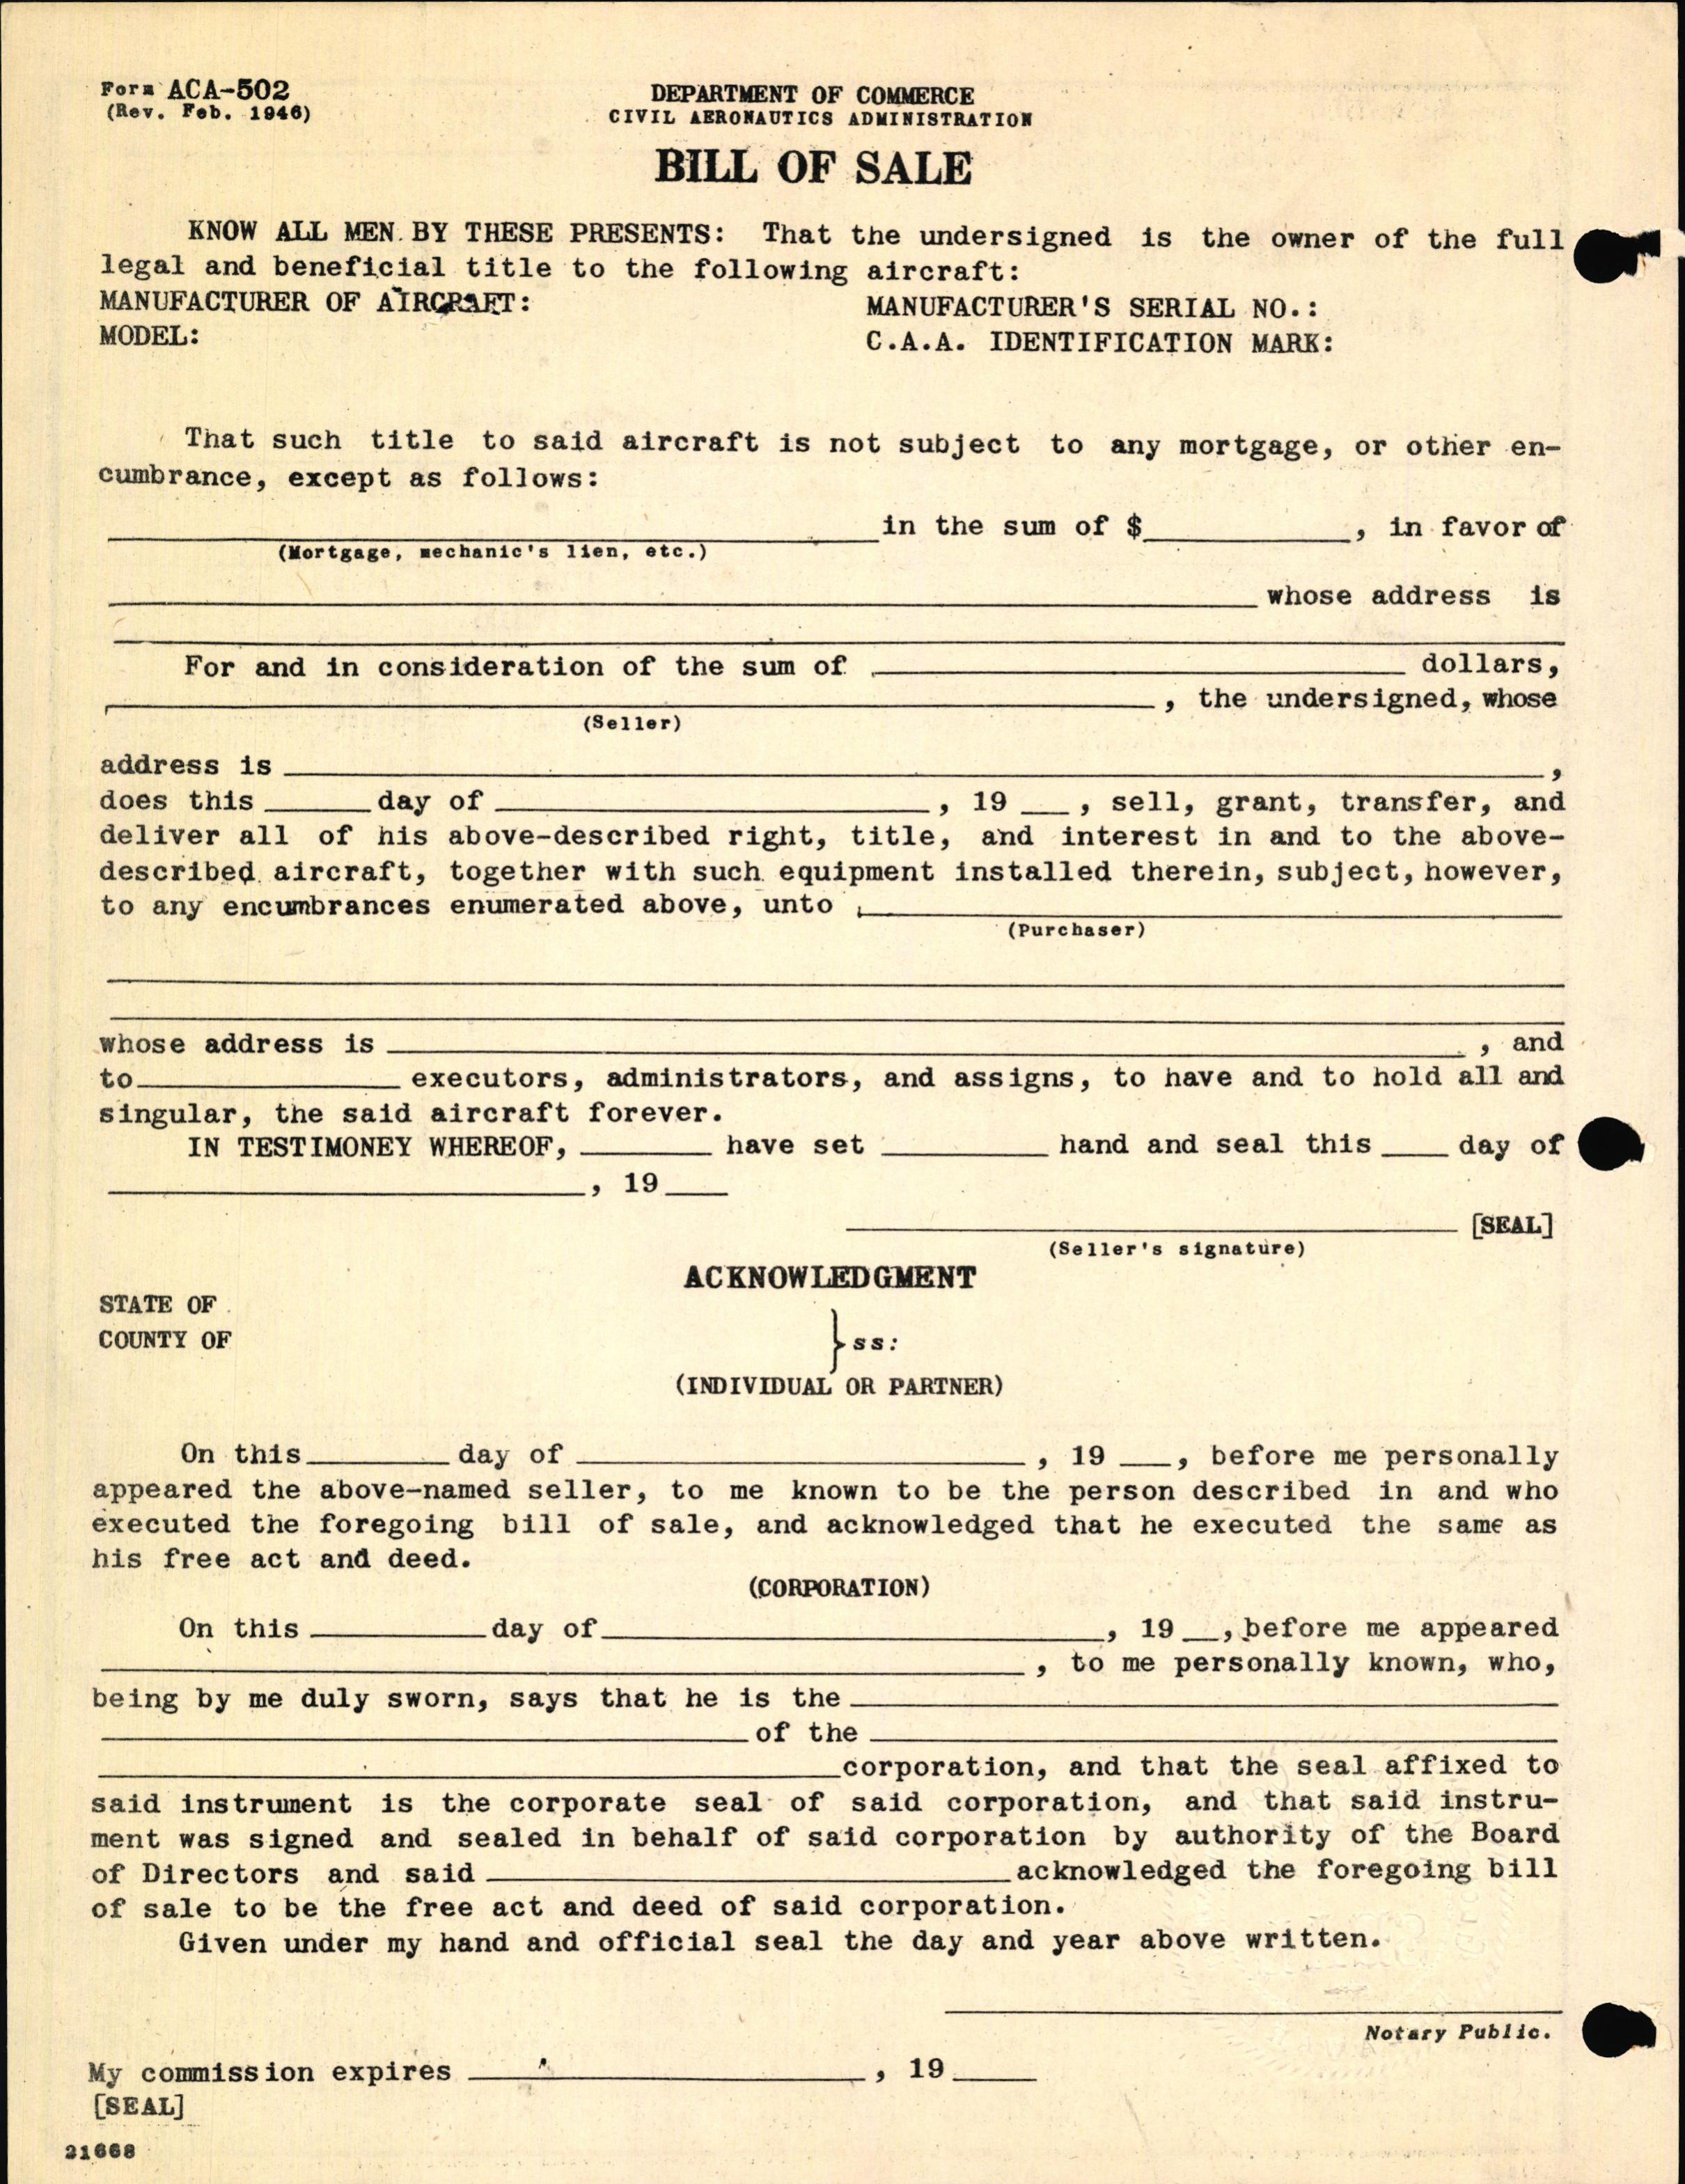 Sample page 4 from AirCorps Library document: Technical Information for Serial Number 2106